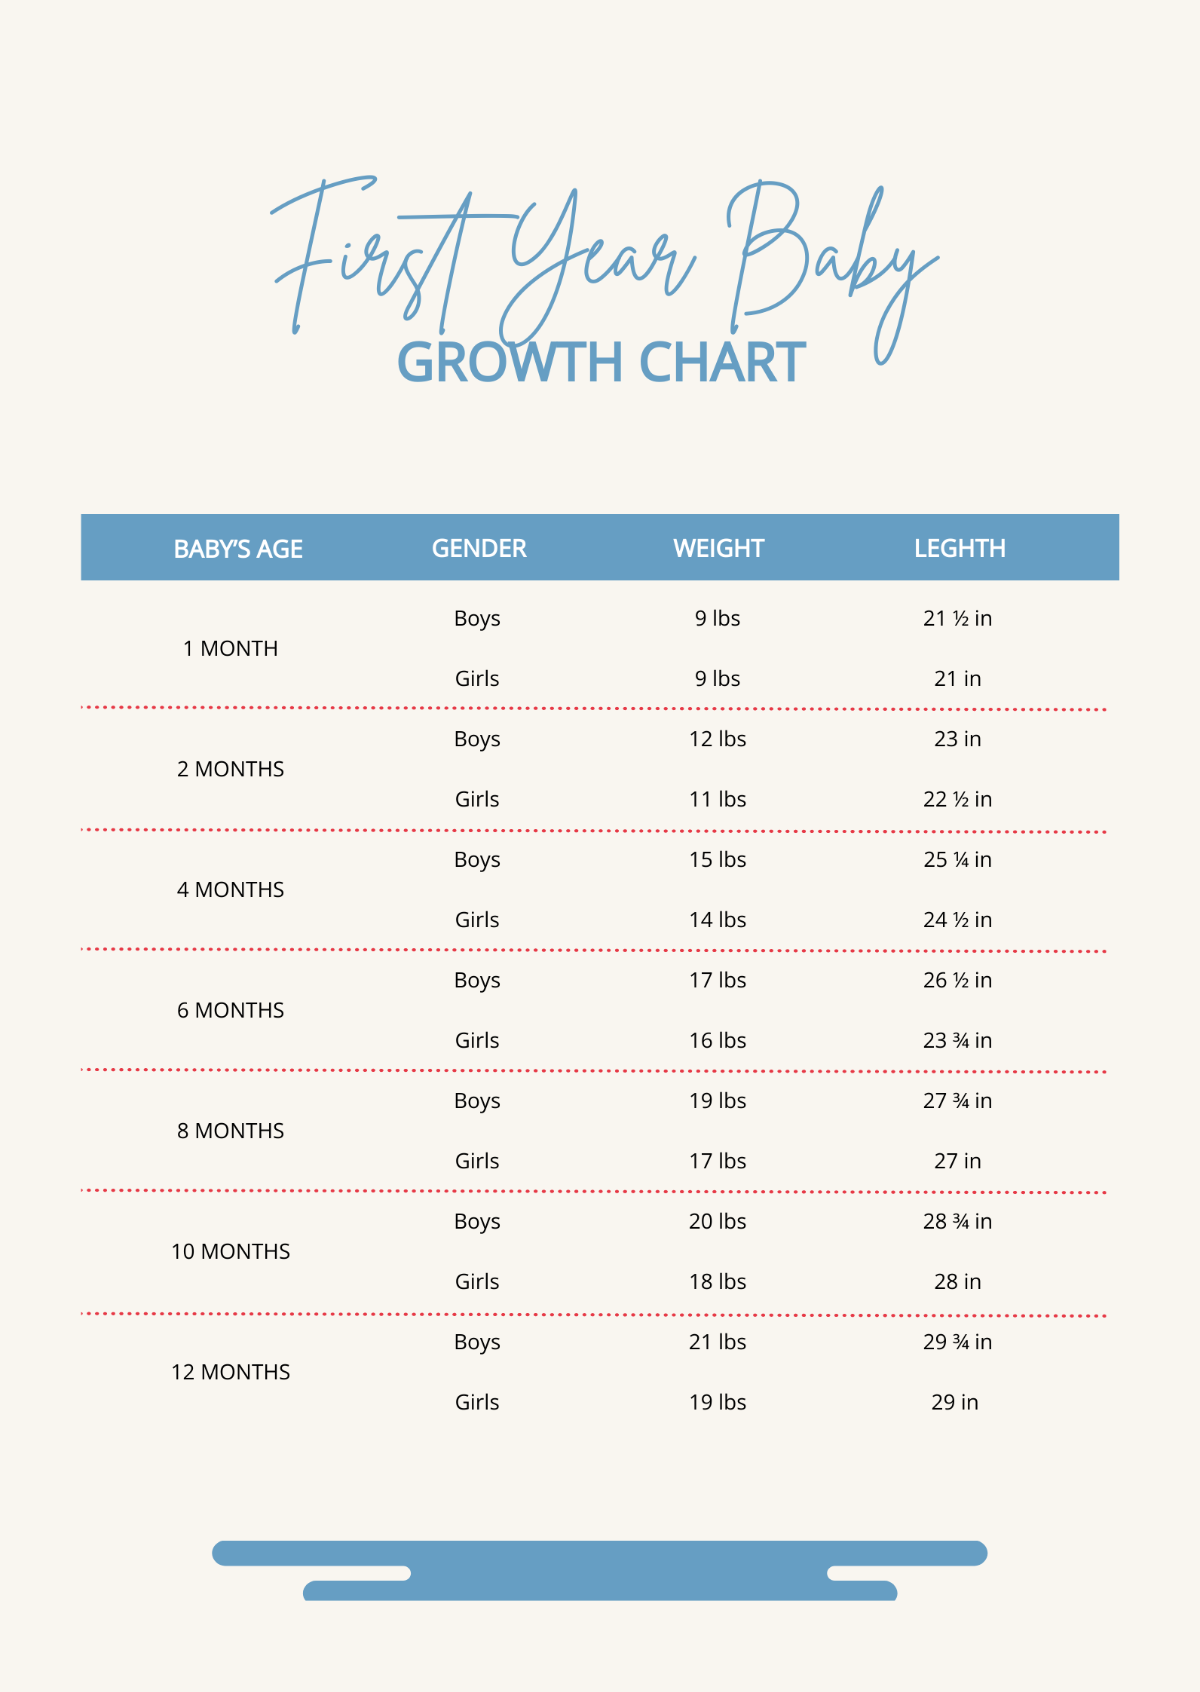 First Year Baby Growth Chart Template